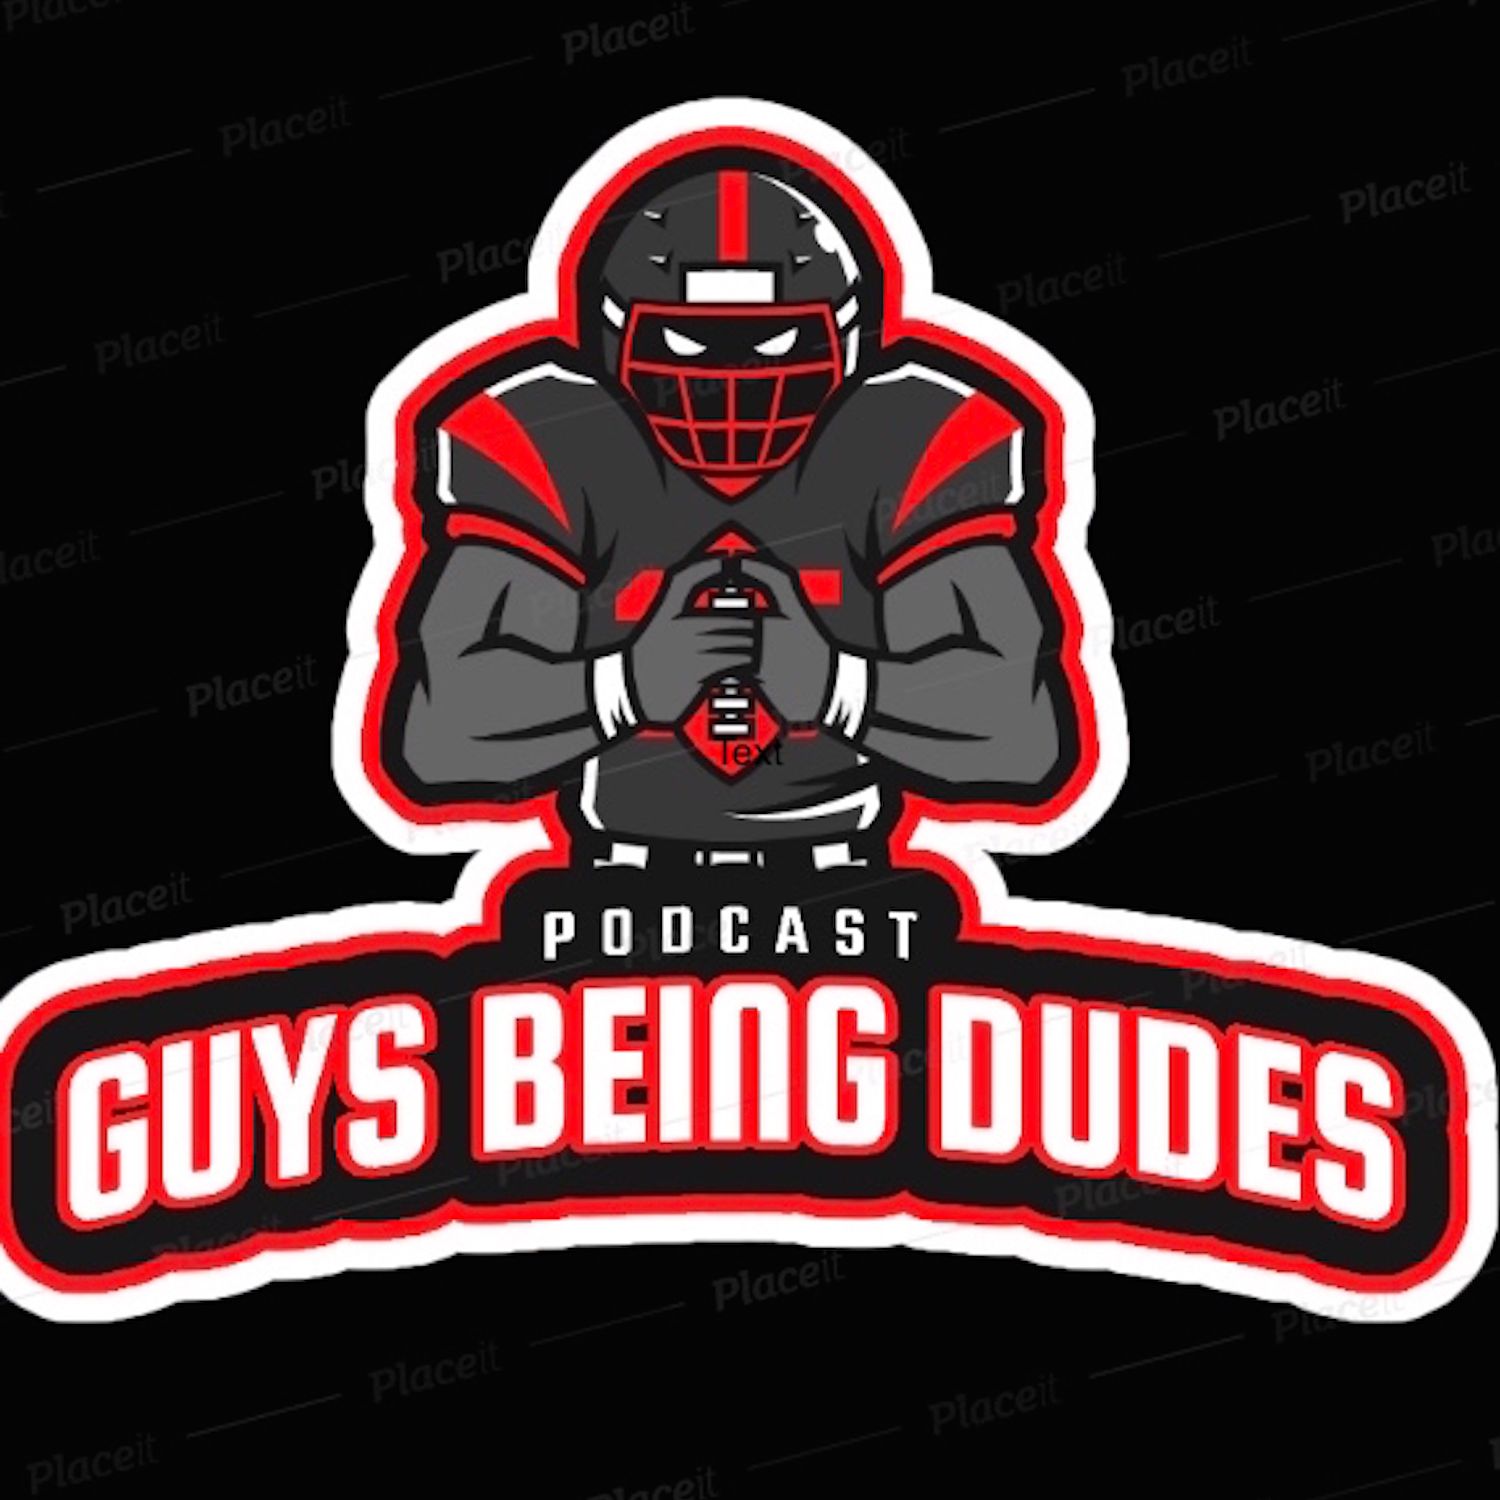 Guys Being Dudes Podcast